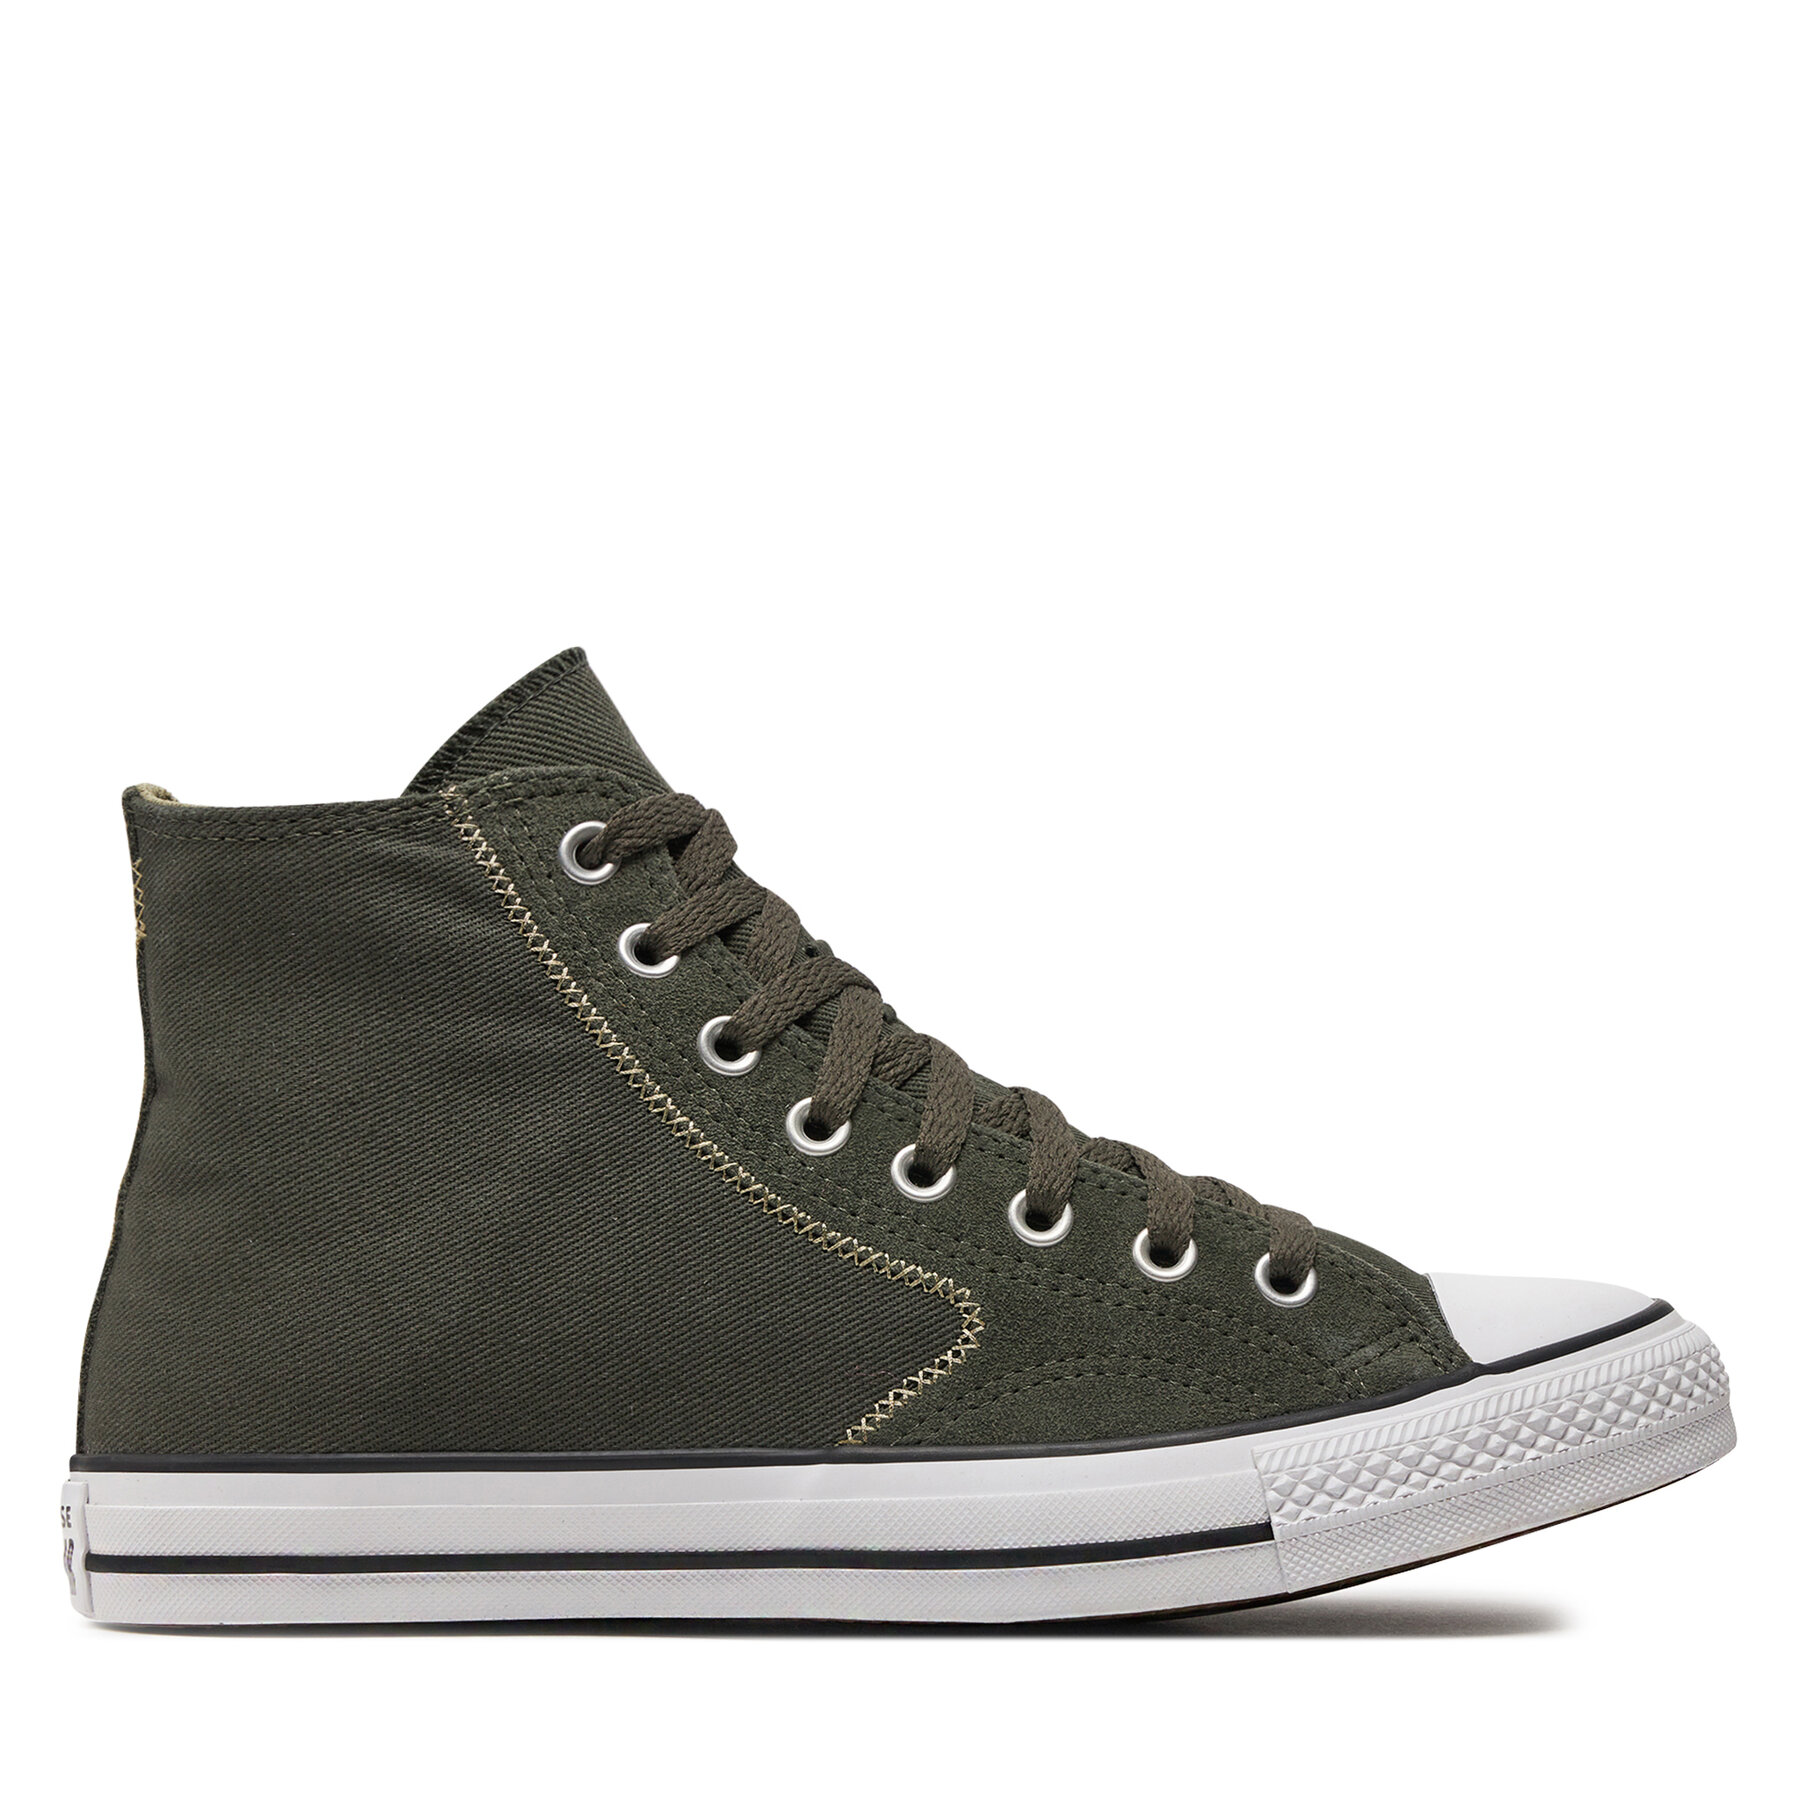 Sneakers aus Stoff Converse Chuck Taylor All Star Mixed Materials A06572C Cave Green/Mossy Sloth von Converse